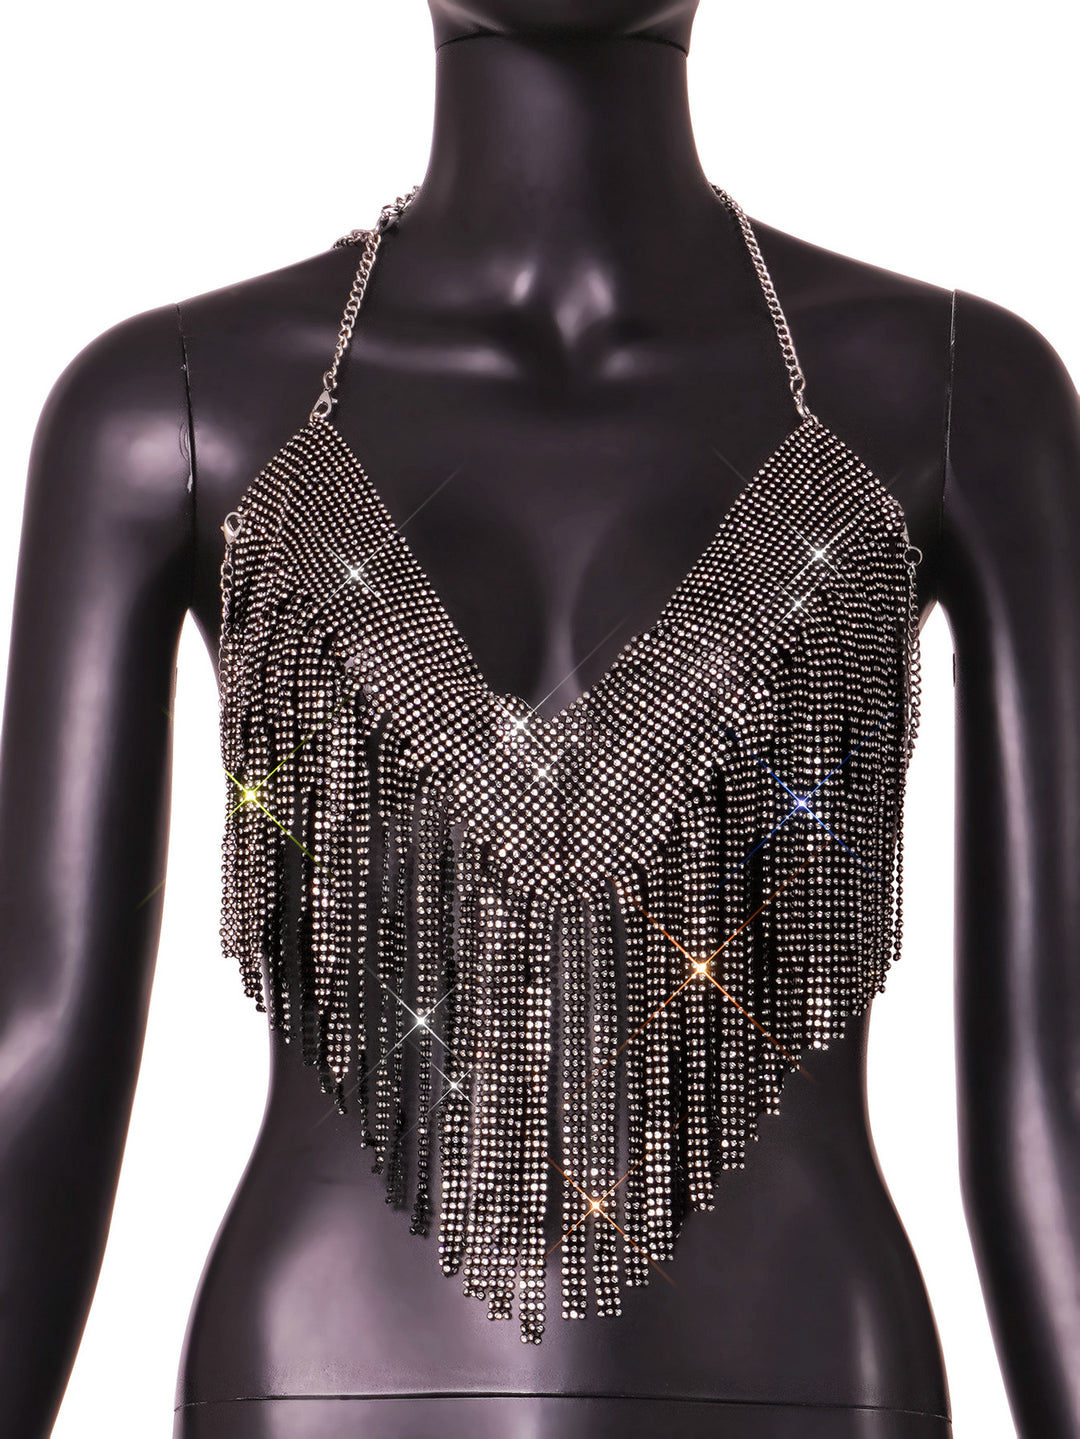 Women Clothing Sexy Full Rhinestone Tassel Exposed Cropped V Plunge Vest Camisole Cropped Outfit Top